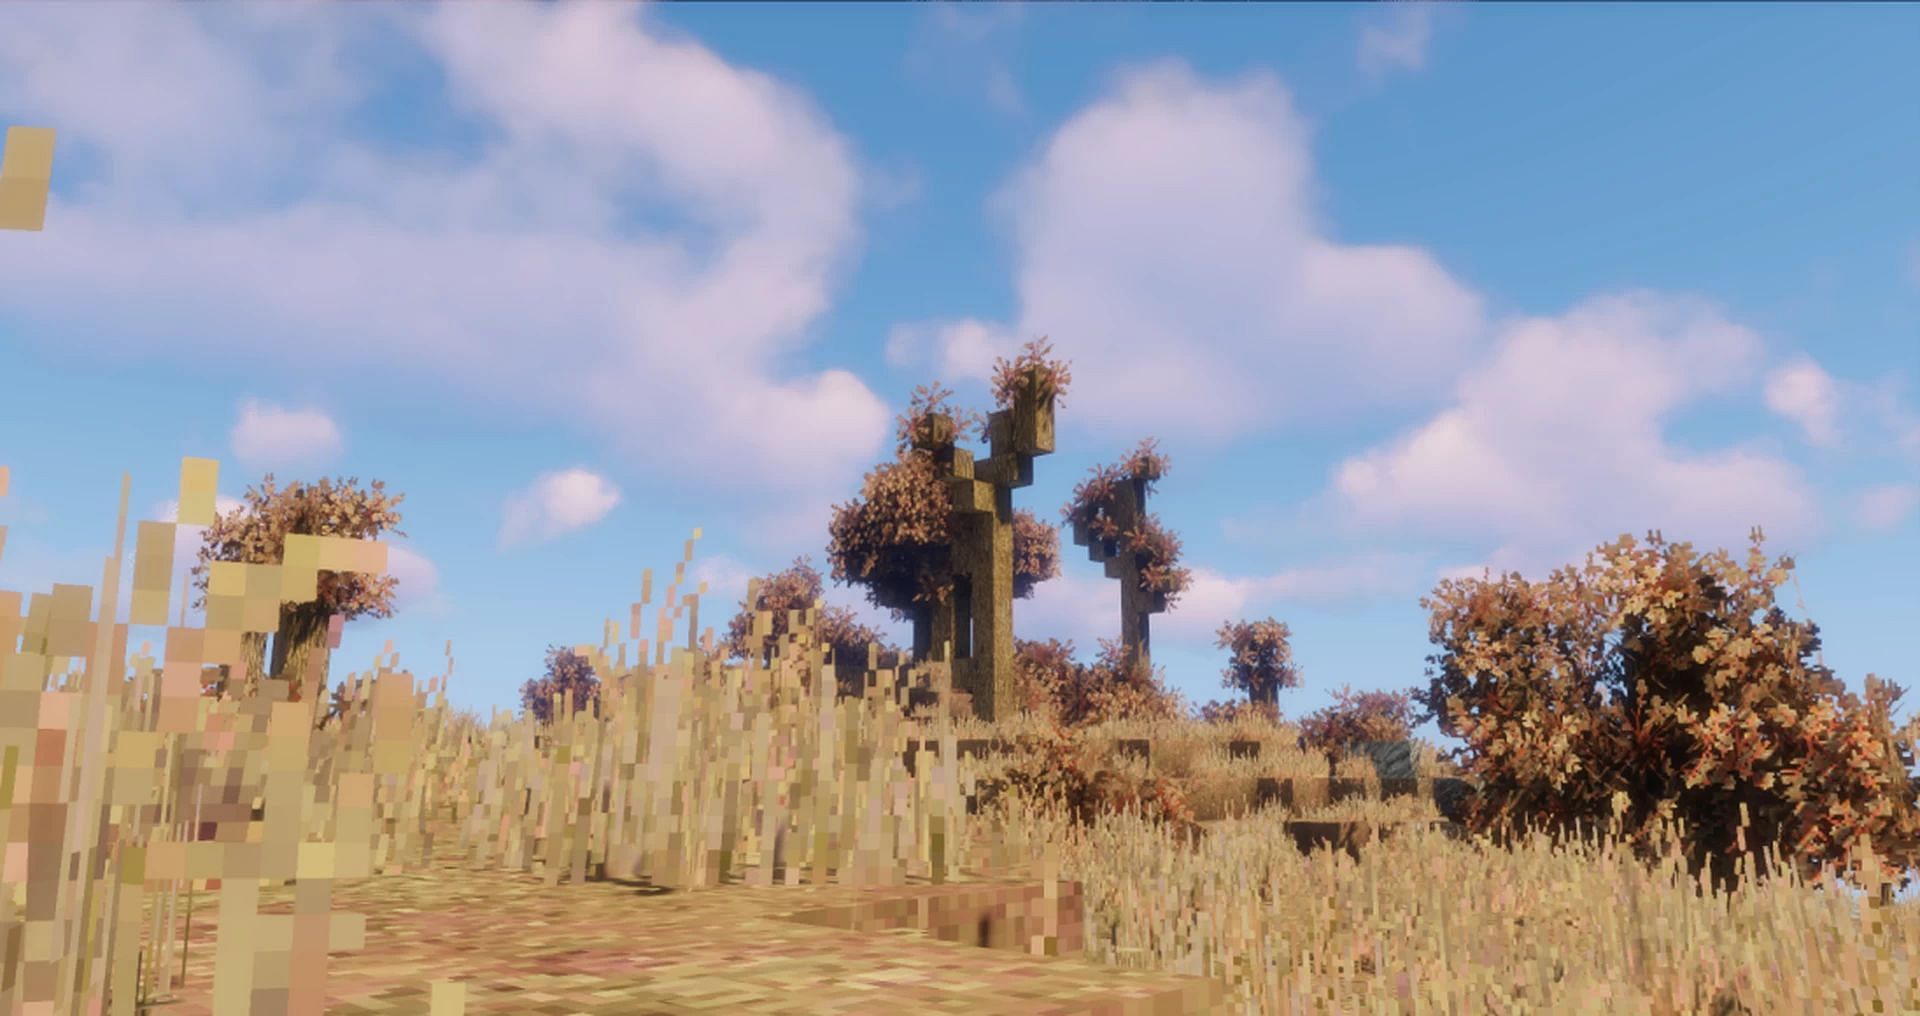 The Ashlands are great for a desolate wasteland feel (Image via Planet Minecraft user The Ashlands)